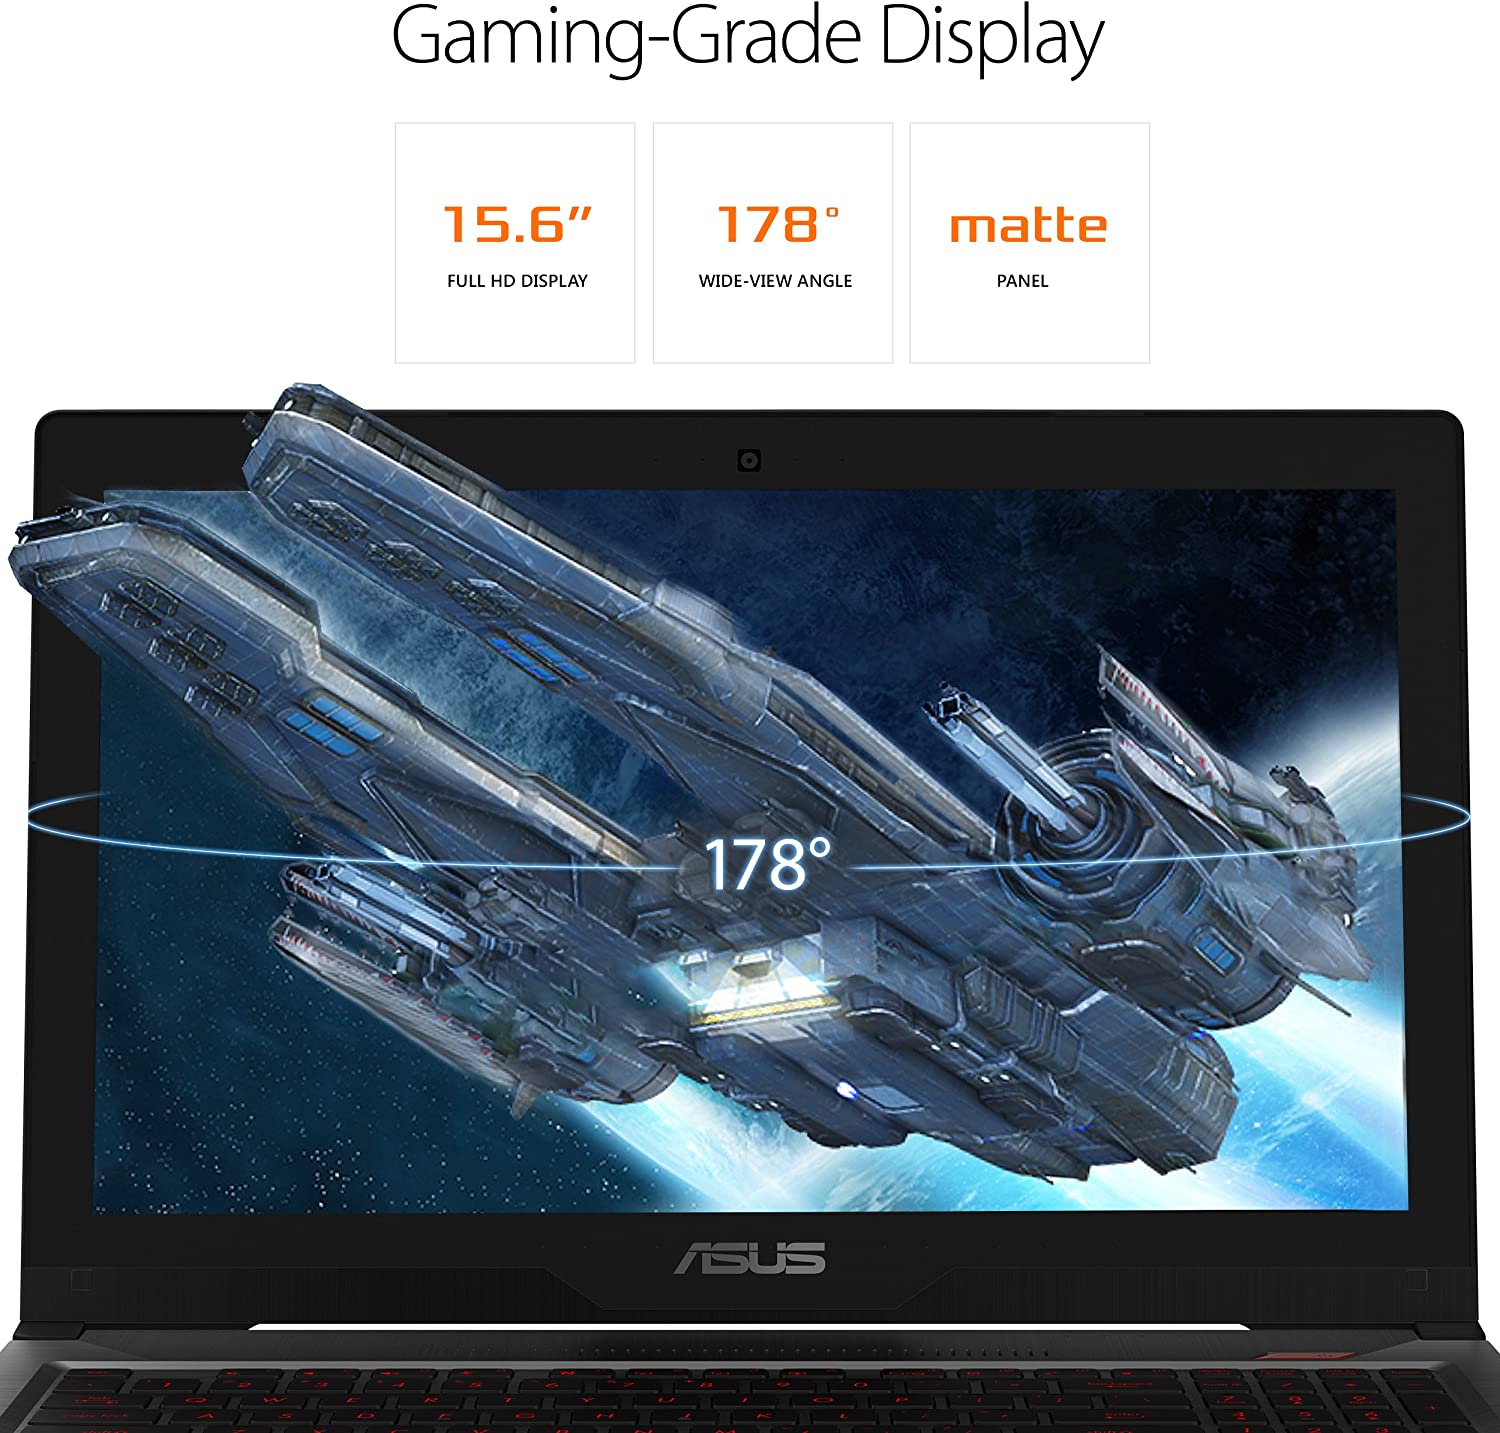 This image shows the display of the ASUS ROG FX503 Gaming Laptop.